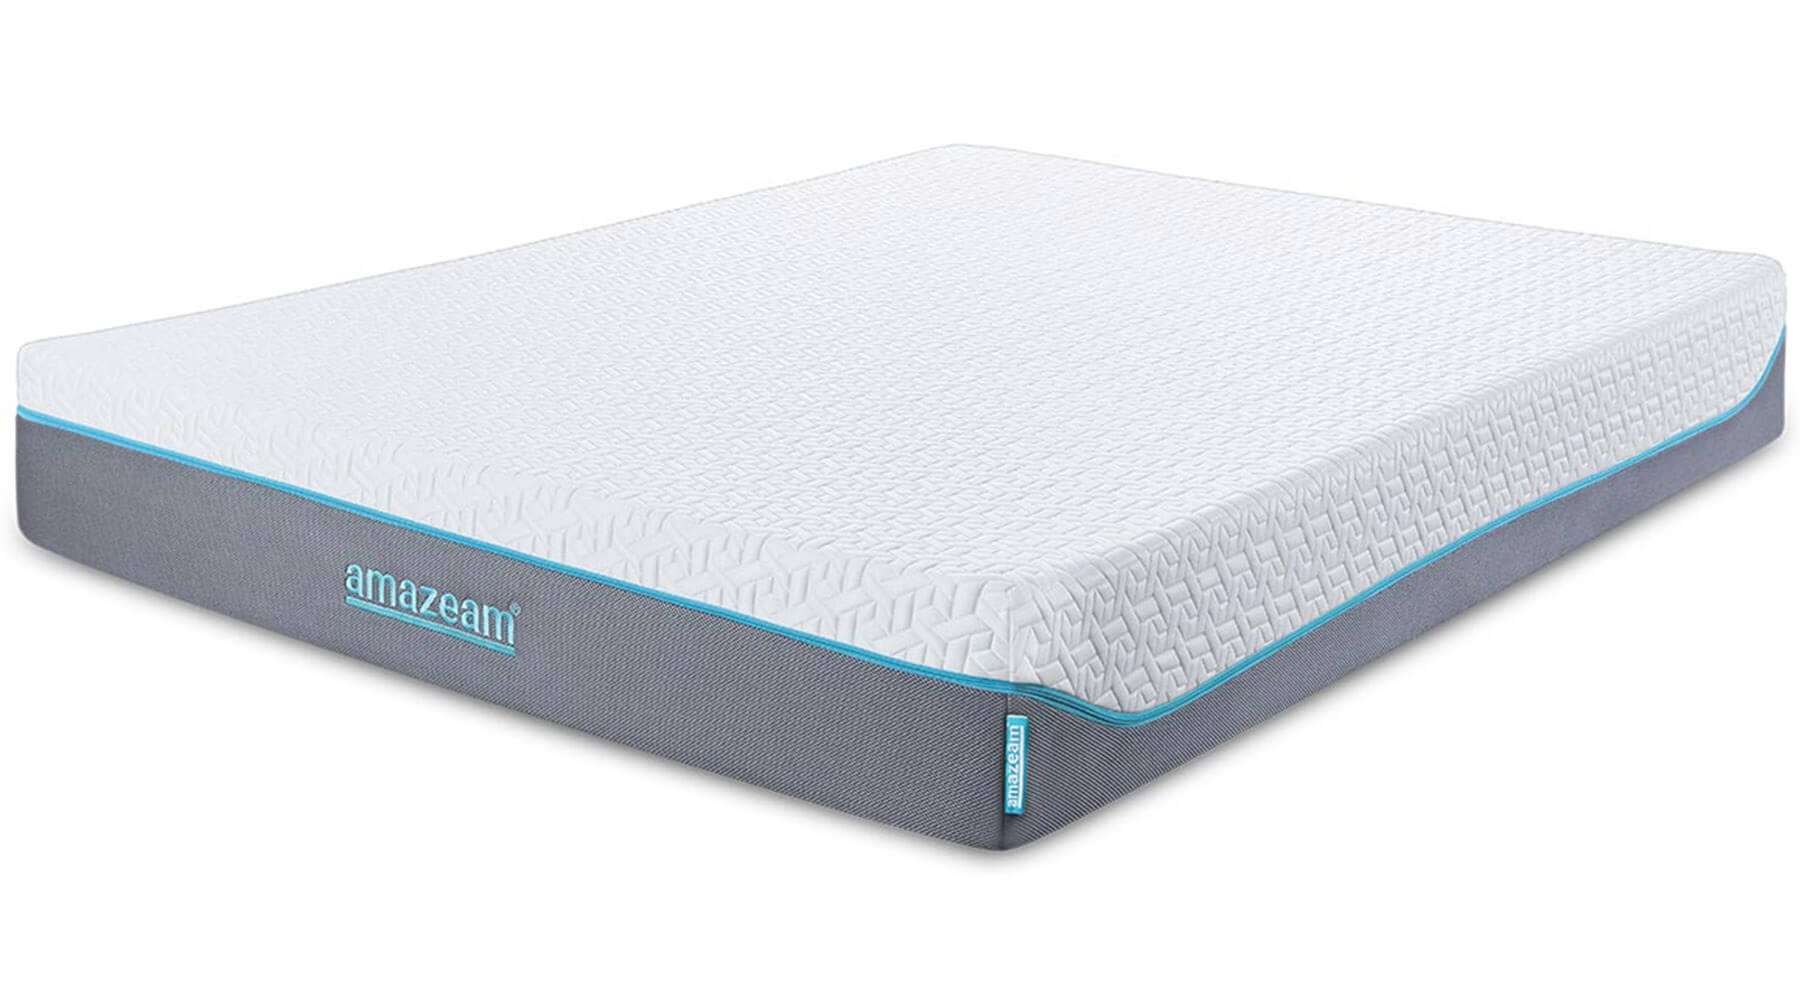 Side view of Amazeam mattress displaying logo and tag, known for its cooling gel technology and chill fabric, perfect for a comfortable sleep in Malaysia